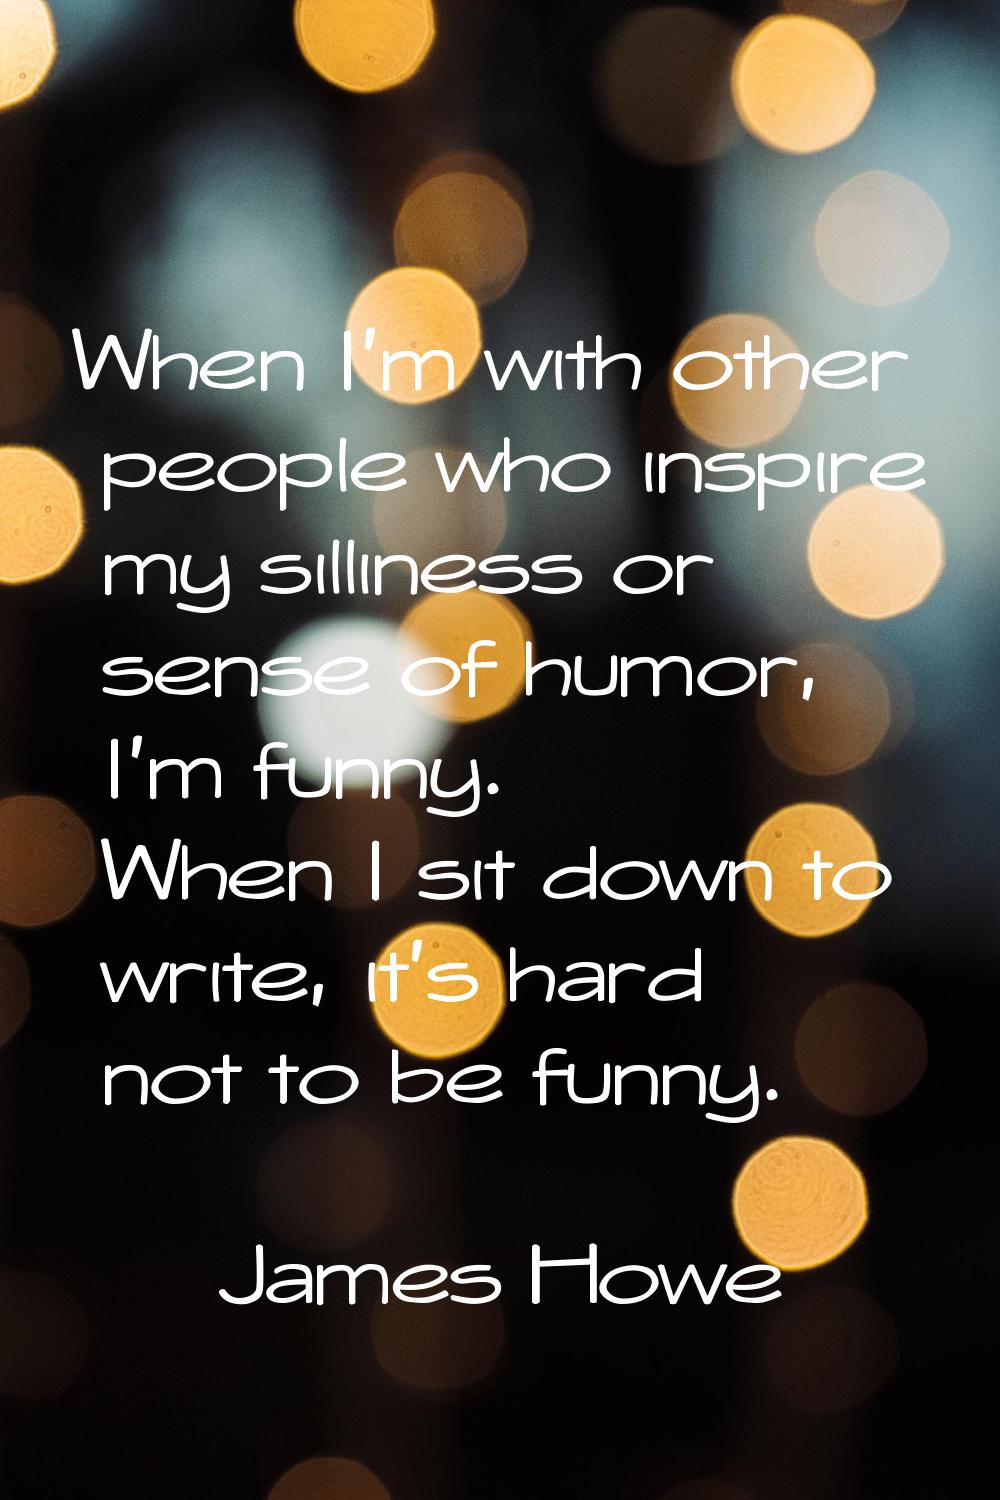 When I'm with other people who inspire my silliness or sense of humor, I'm funny. When I sit down t